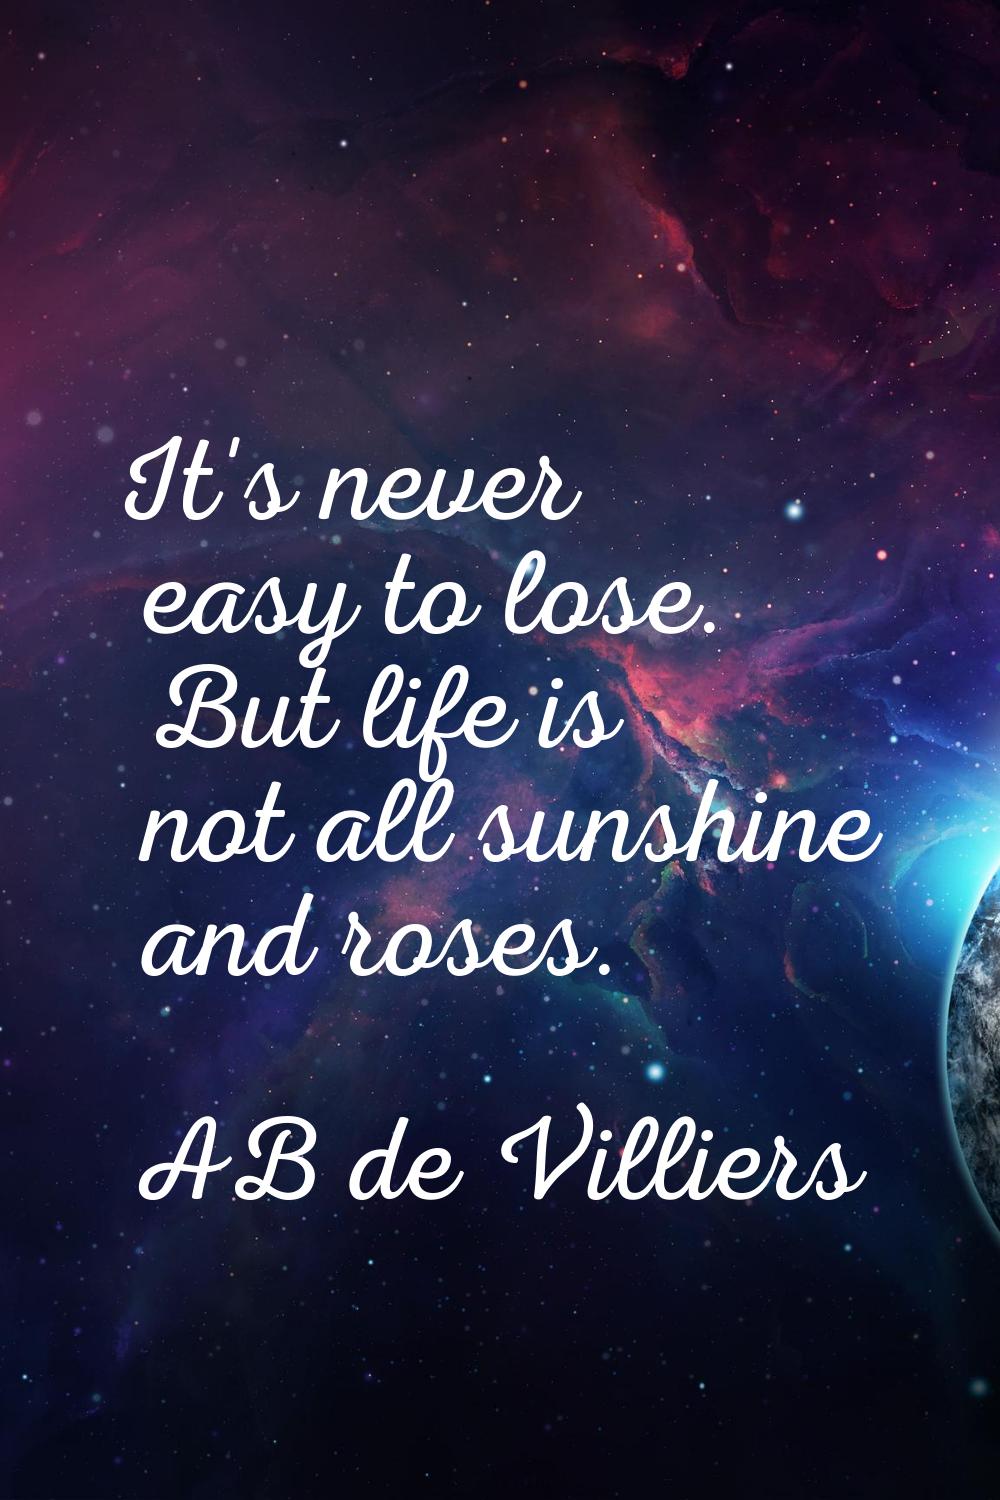 It's never easy to lose. But life is not all sunshine and roses.